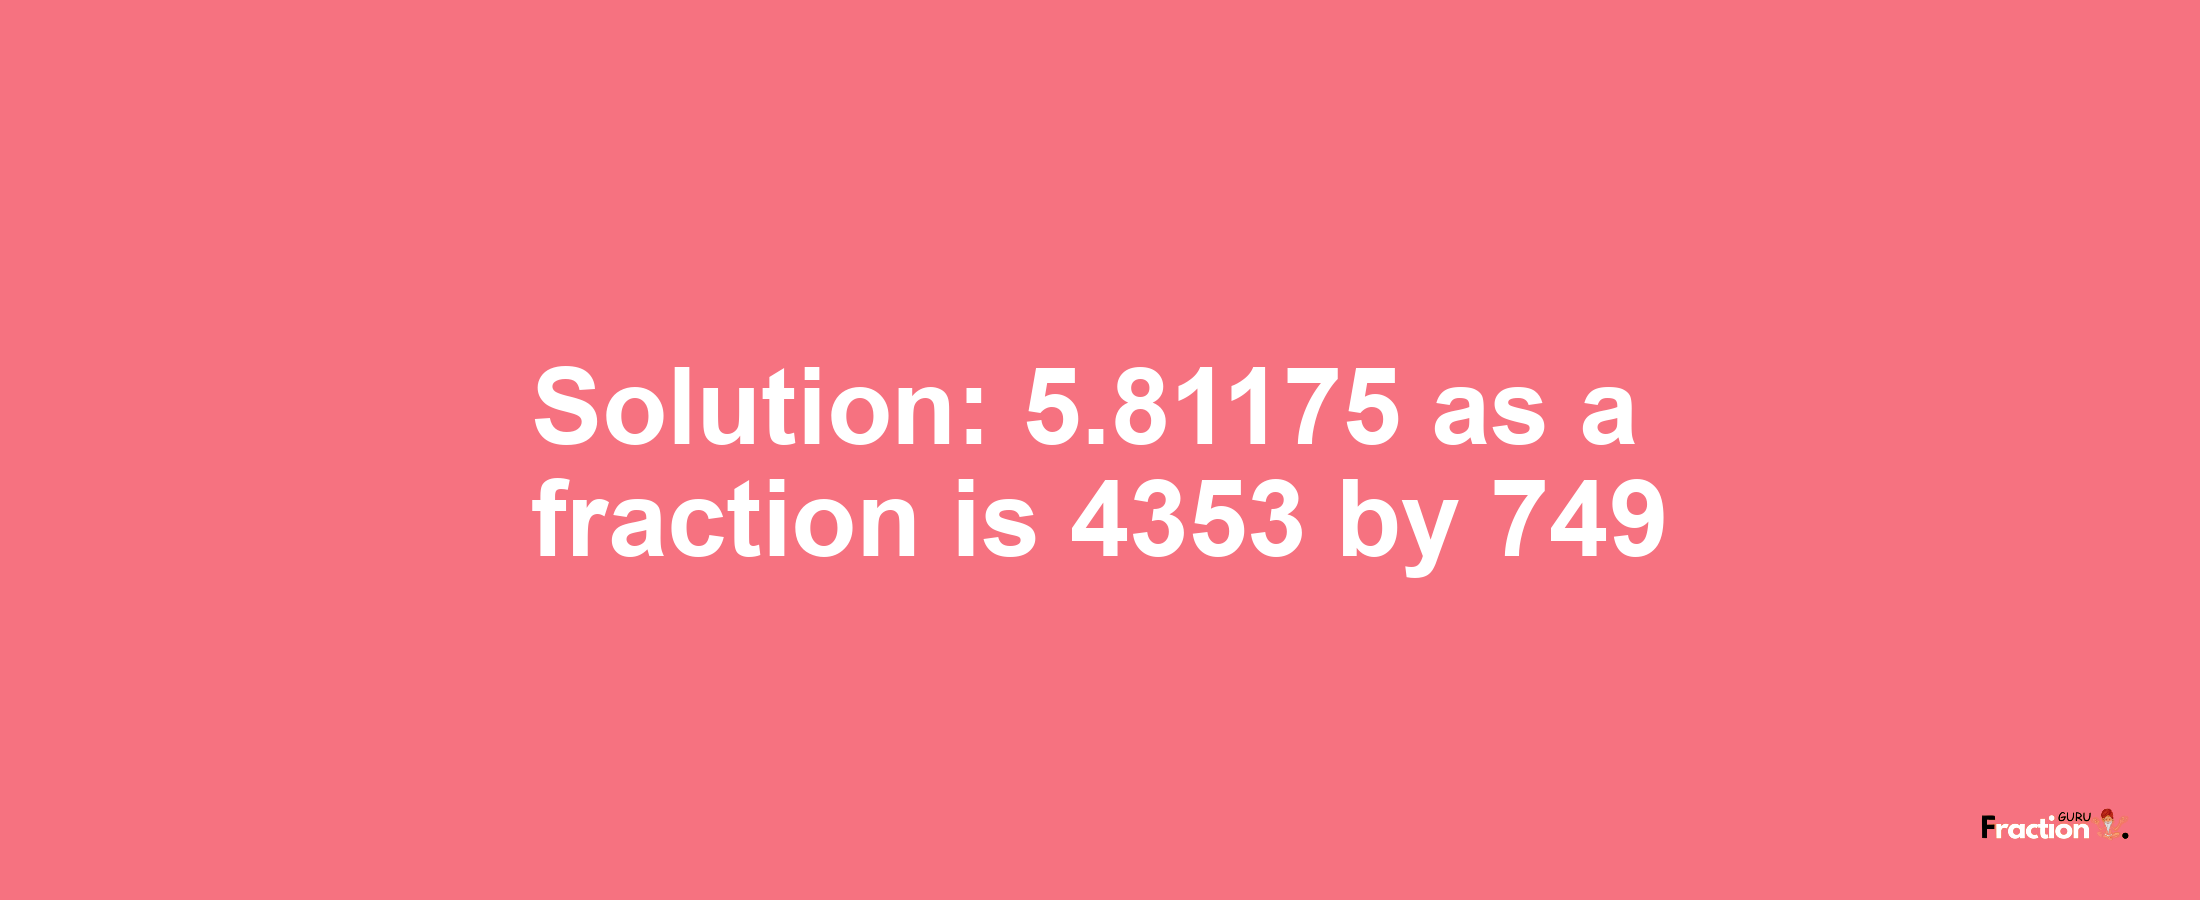 Solution:5.81175 as a fraction is 4353/749